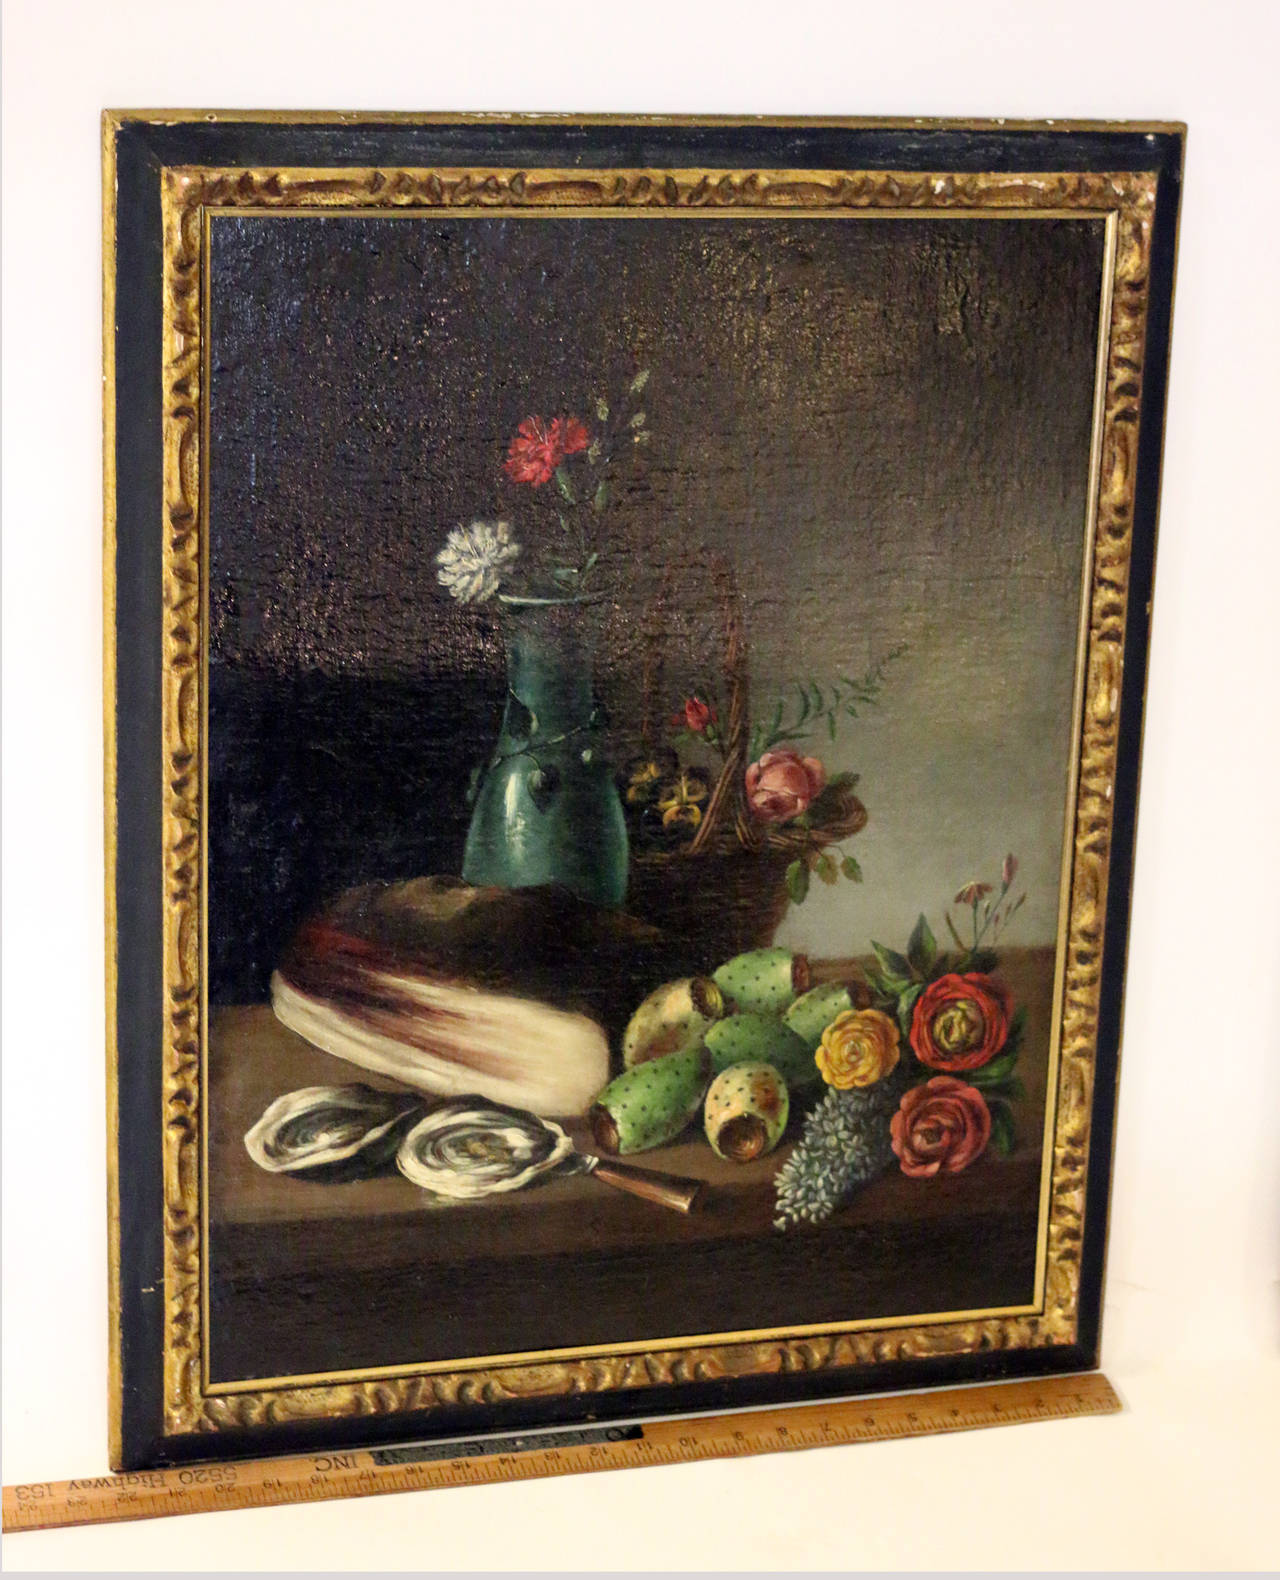 Still life pair of unusual subject matter; one featuring various fish, flowers, fruit and a large basket. The other a vase of flowers including lilac, roses, pansies and carnations with prickly pears, oysters and a small basket. Oil on canvas,